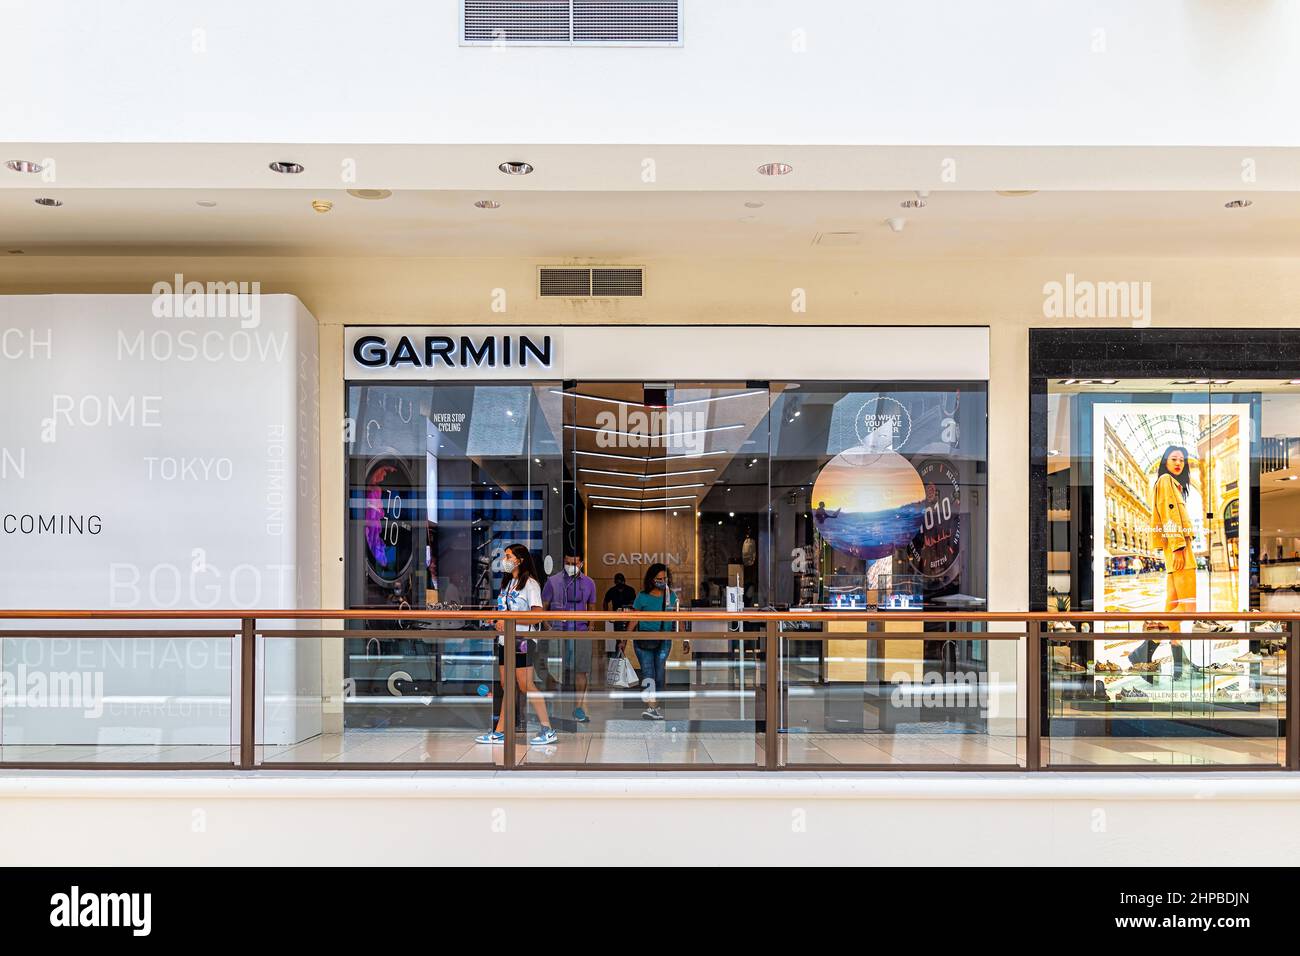 Garmin Logo High Resolution Stock Photography and Images - Alamy